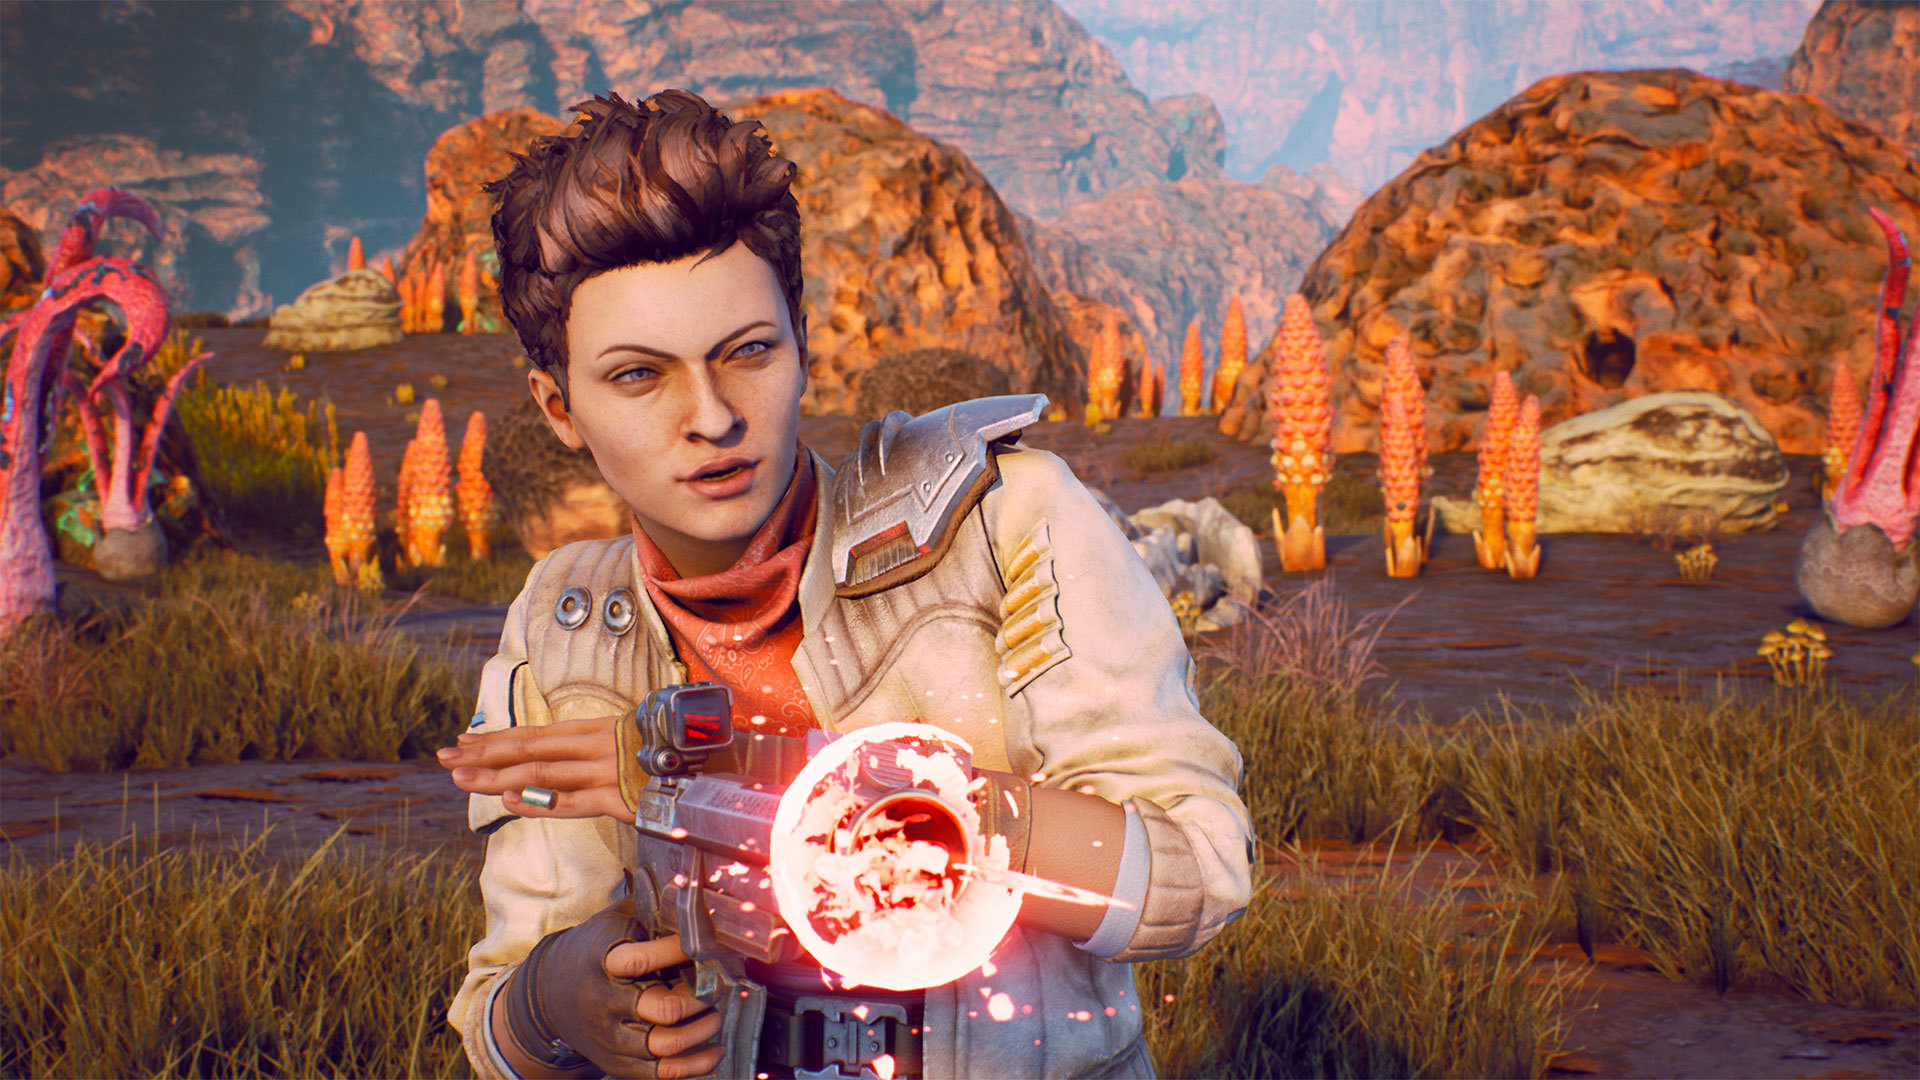 the outer worlds 2 xbox one